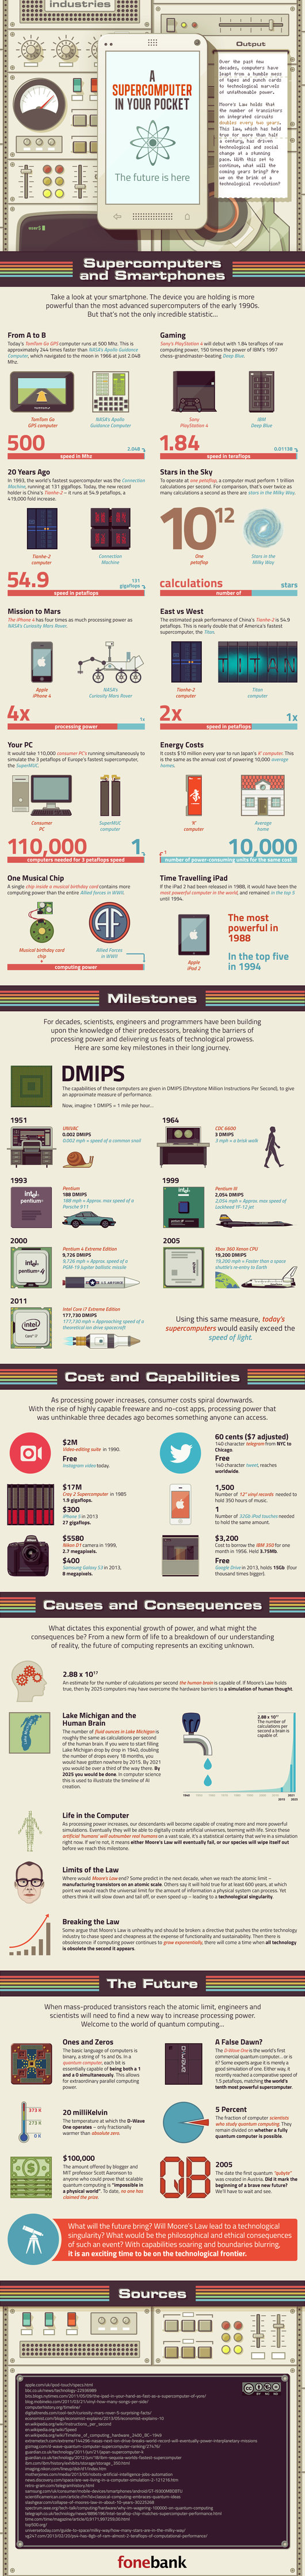 A supercomputer in you pocket infographic